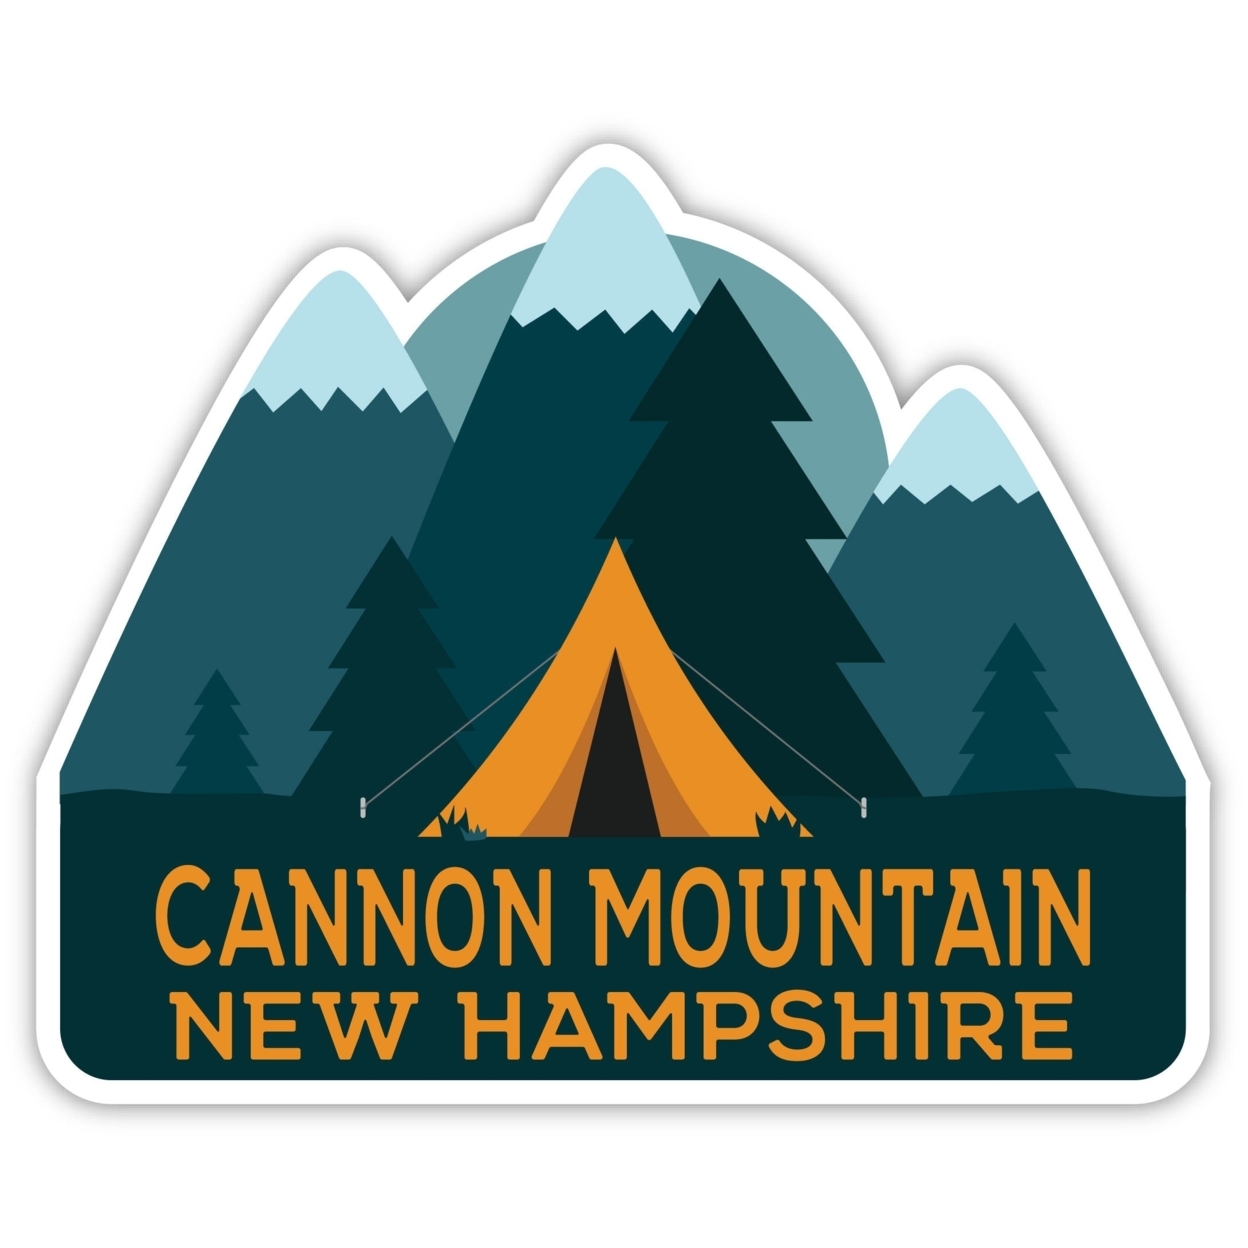 Cannon Mountain New Hampshire Souvenir Decorative Stickers (Choose Theme And Size) - 4-Pack, 6-Inch, Tent